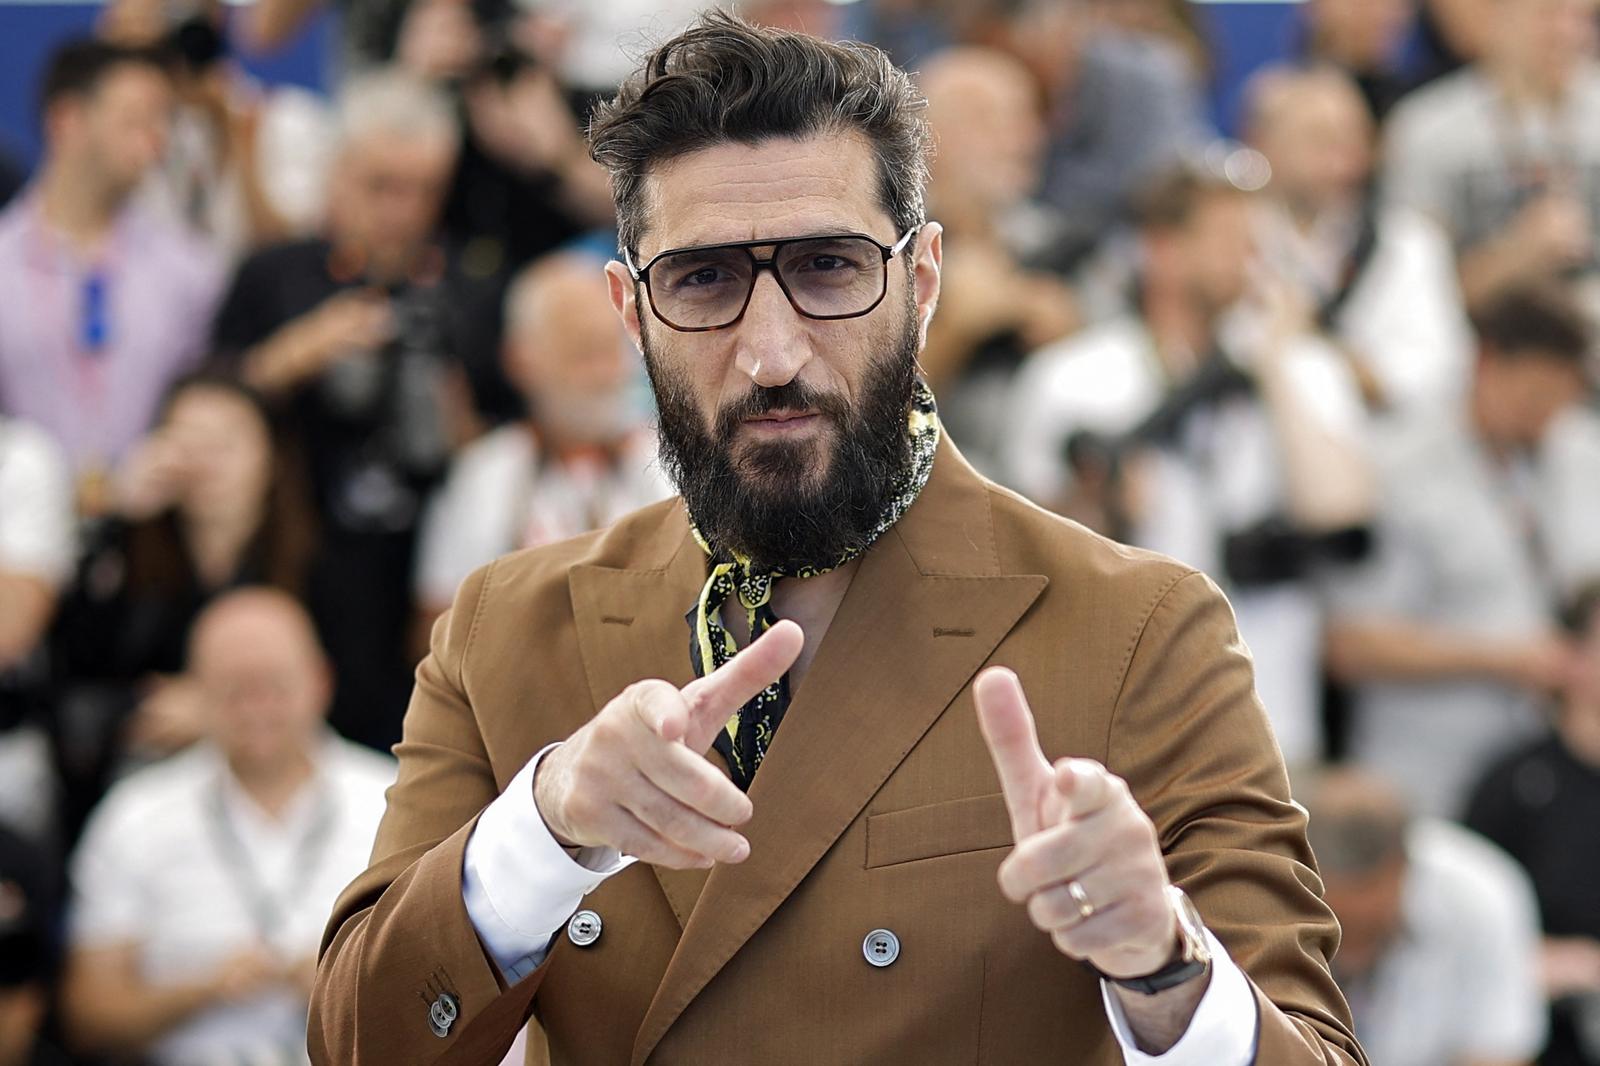 The 75th Cannes Film Festival - Photocall for the film "Boy from Heaven" in competition - Cannes, France, May 21,  2022. Cast member Fares Fares poses. REUTERS/Eric Gaillard Photo: ERIC GAILLARD/REUTERS